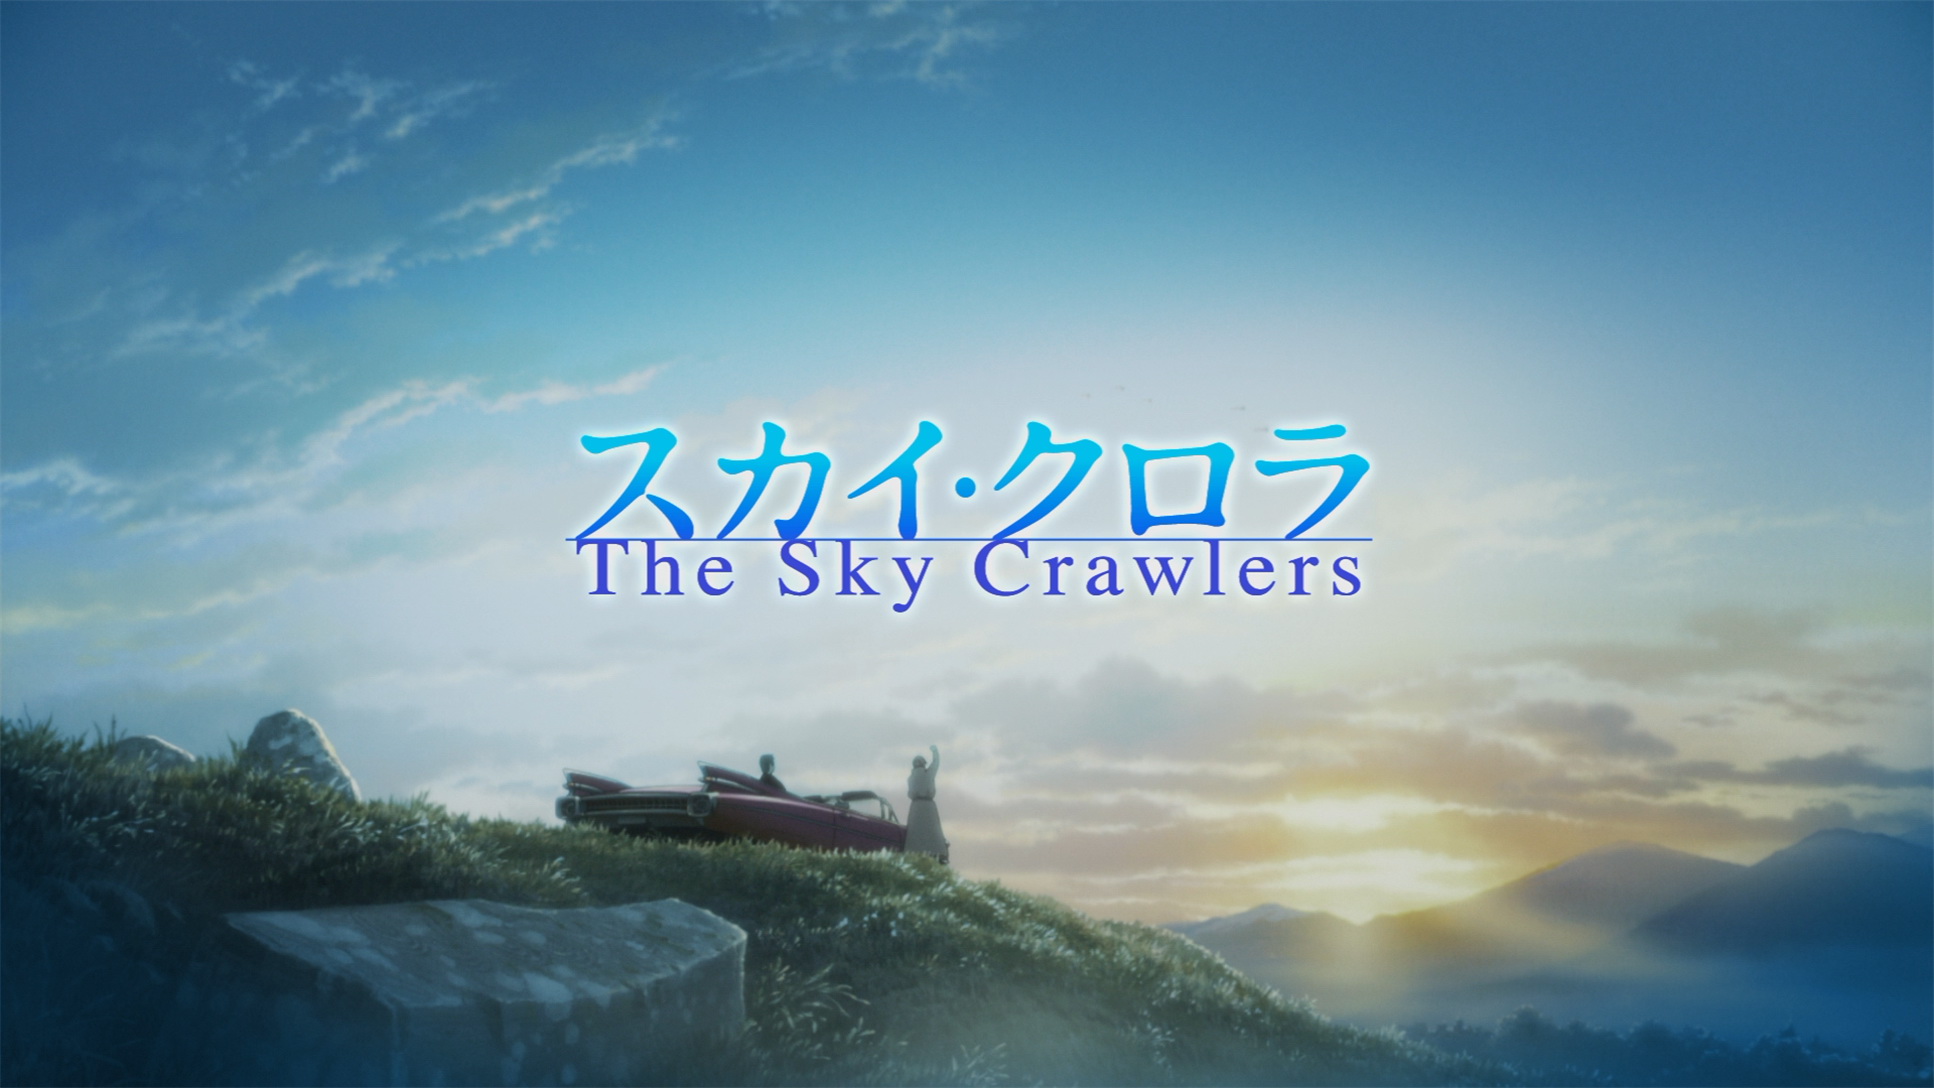 Nice Images Collection: The Sky Crawlers Desktop Wallpapers